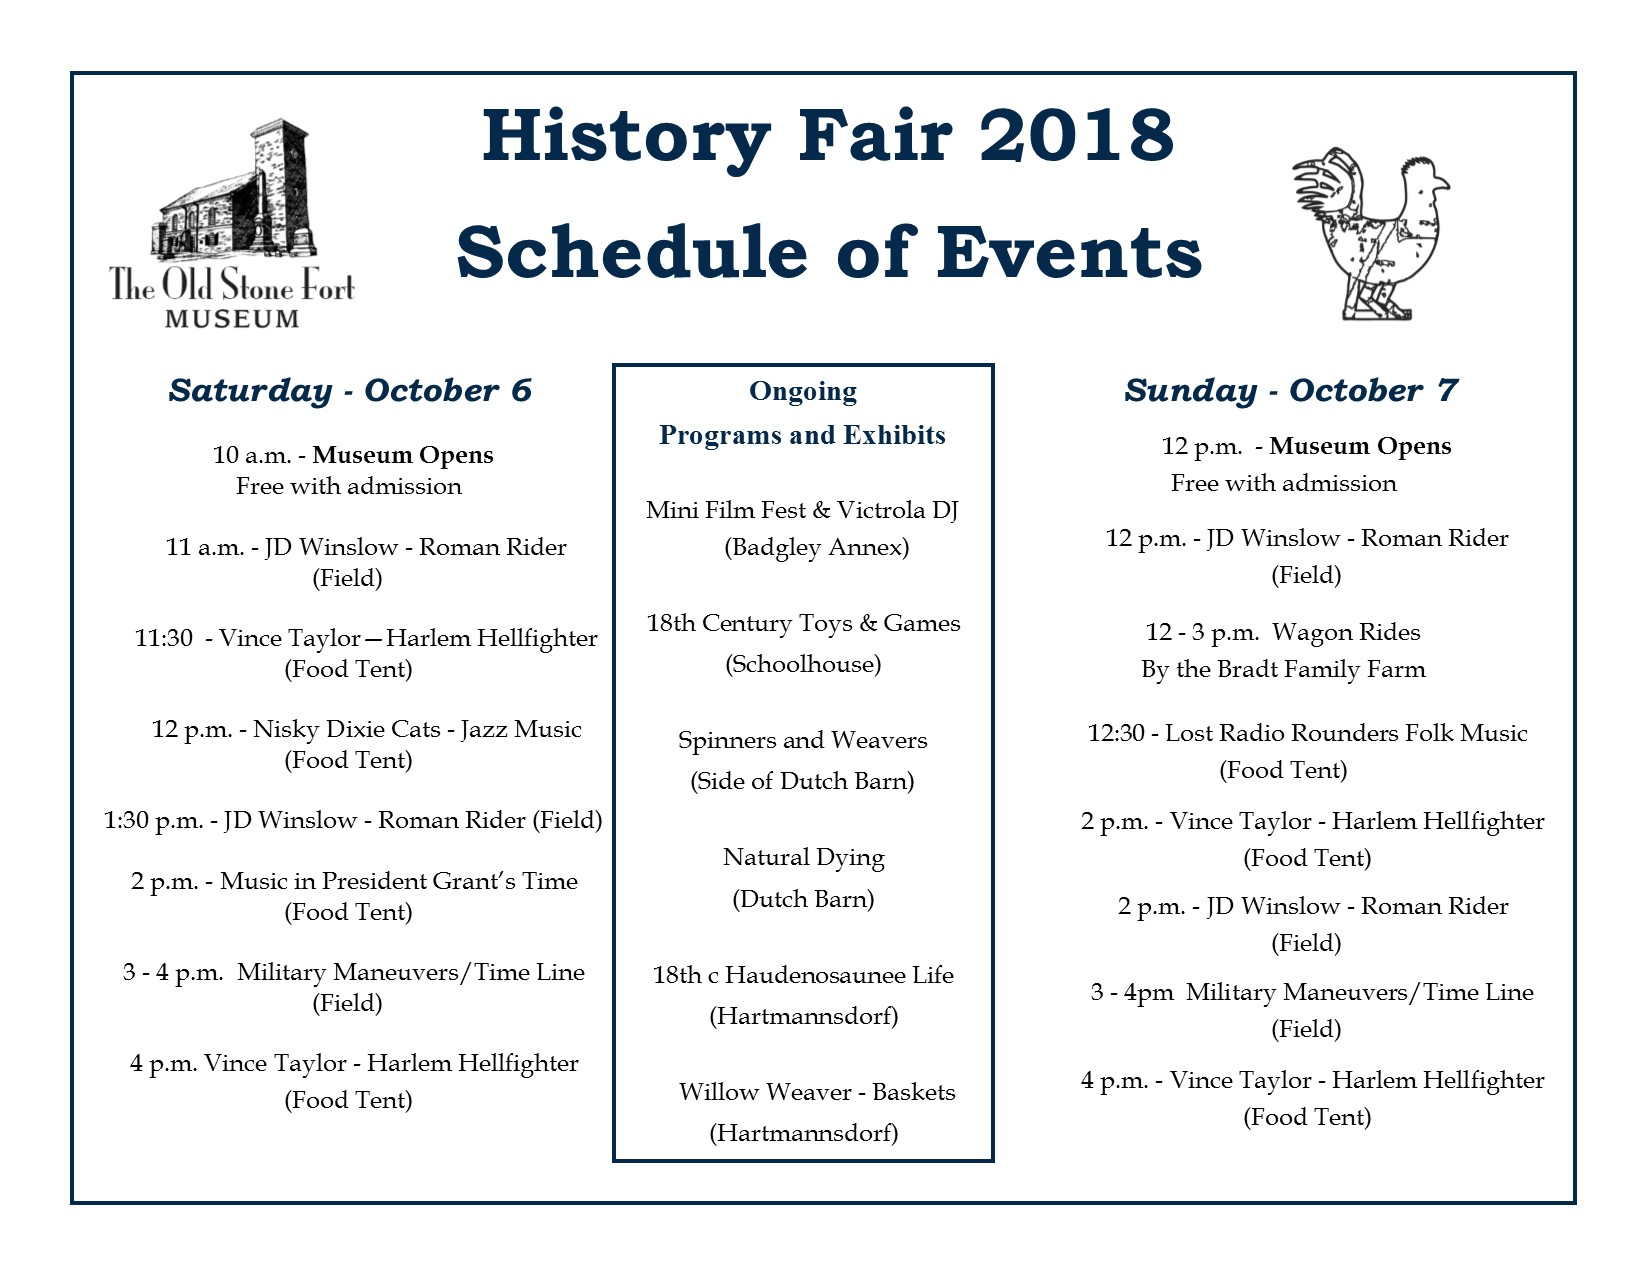 HF 2018 Schedule The Old Stone Fort Museum